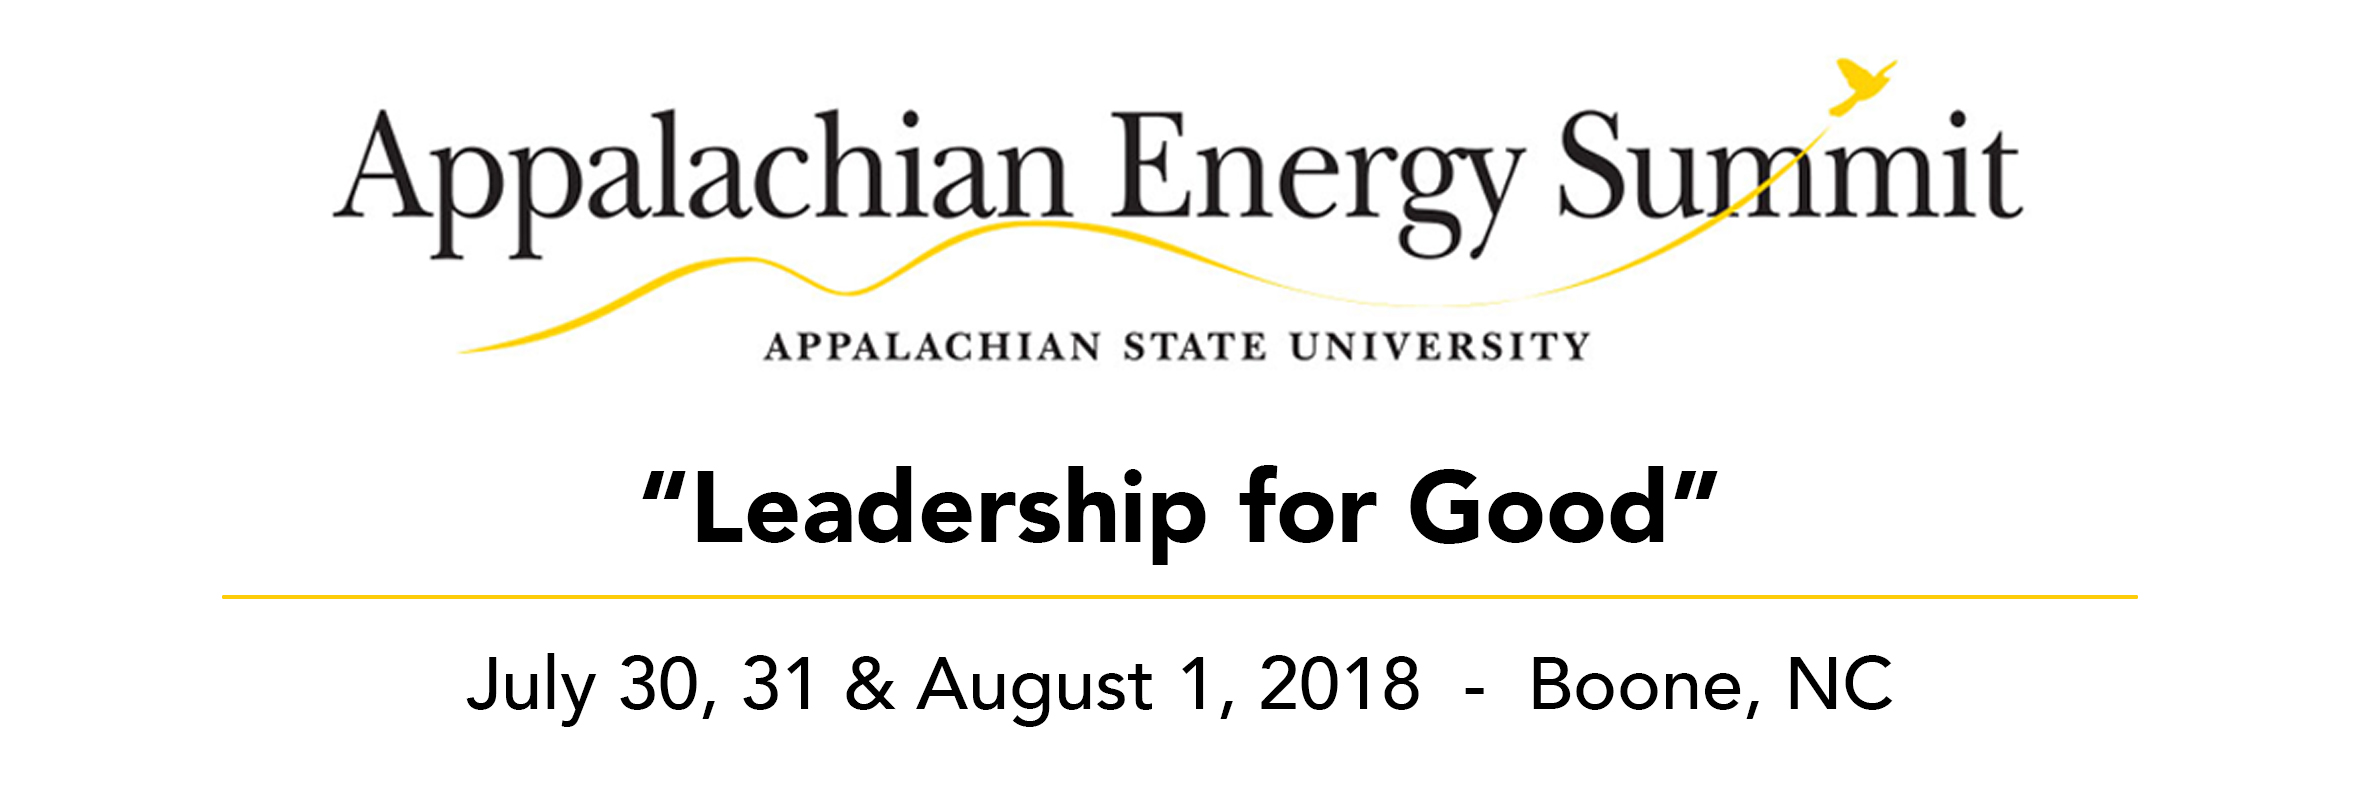 2018 Mid-year Energy Summit, February 20th, 2018 - Appalachian Energy Summit July 20, 31 and August 1, 2018